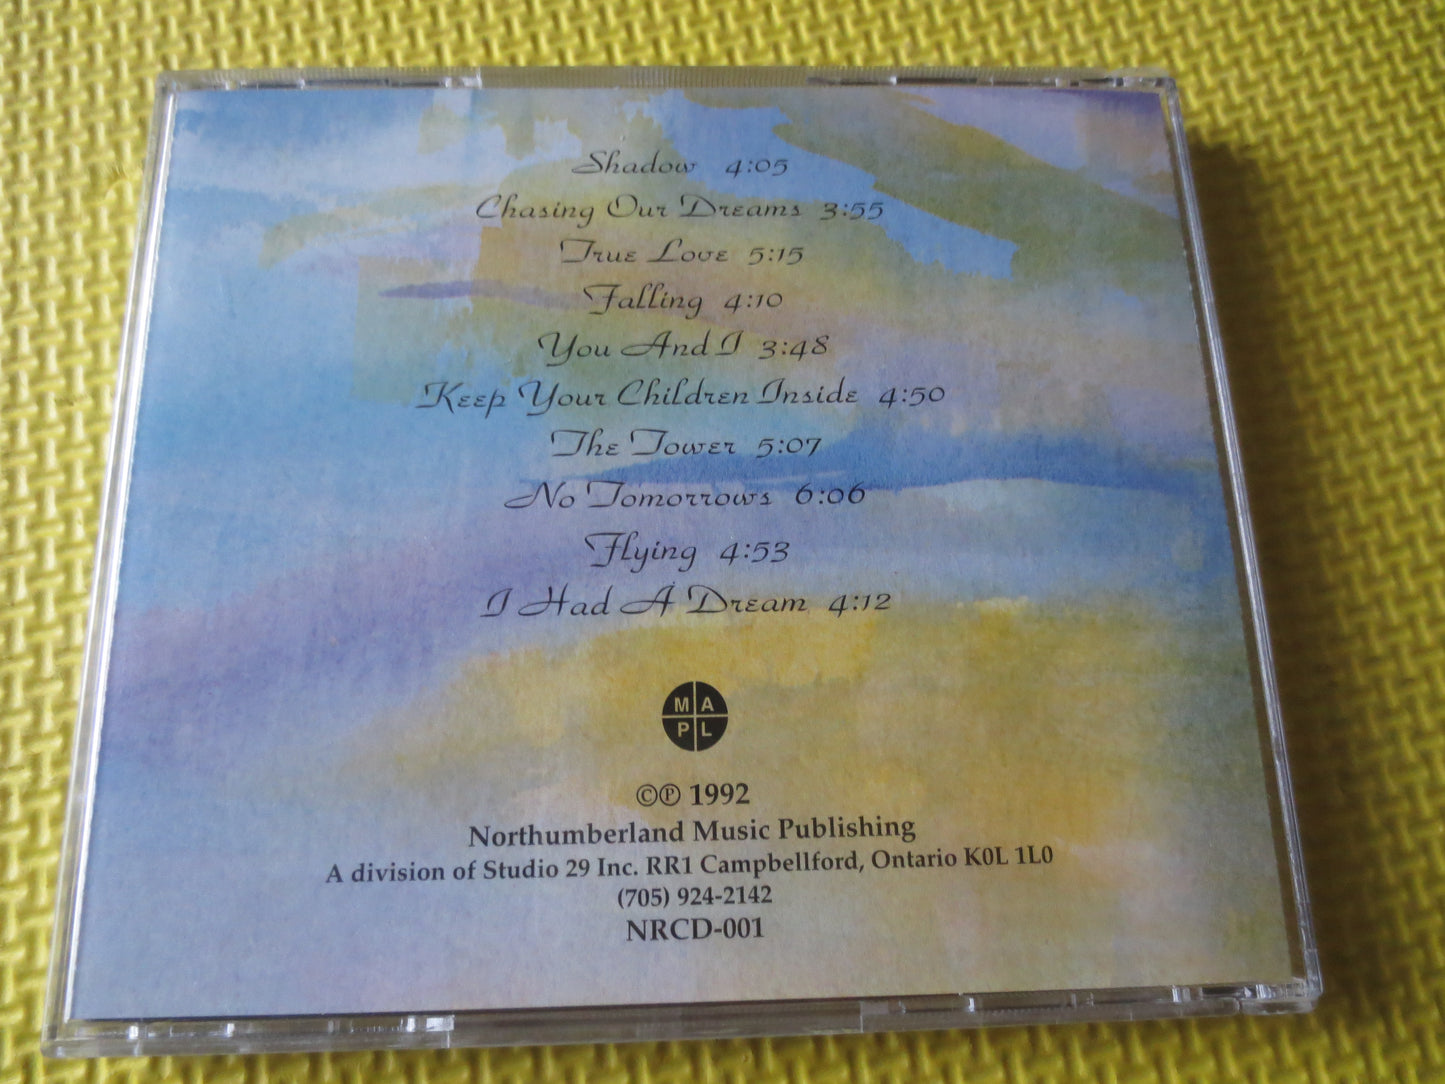 EARTHEN SKY,  Electronic Music Cd, Ambient Music Cd, Earthen Sky Lp, Earthen Sky Cd, Vintage Compact Disc, 1992 Compact Disc